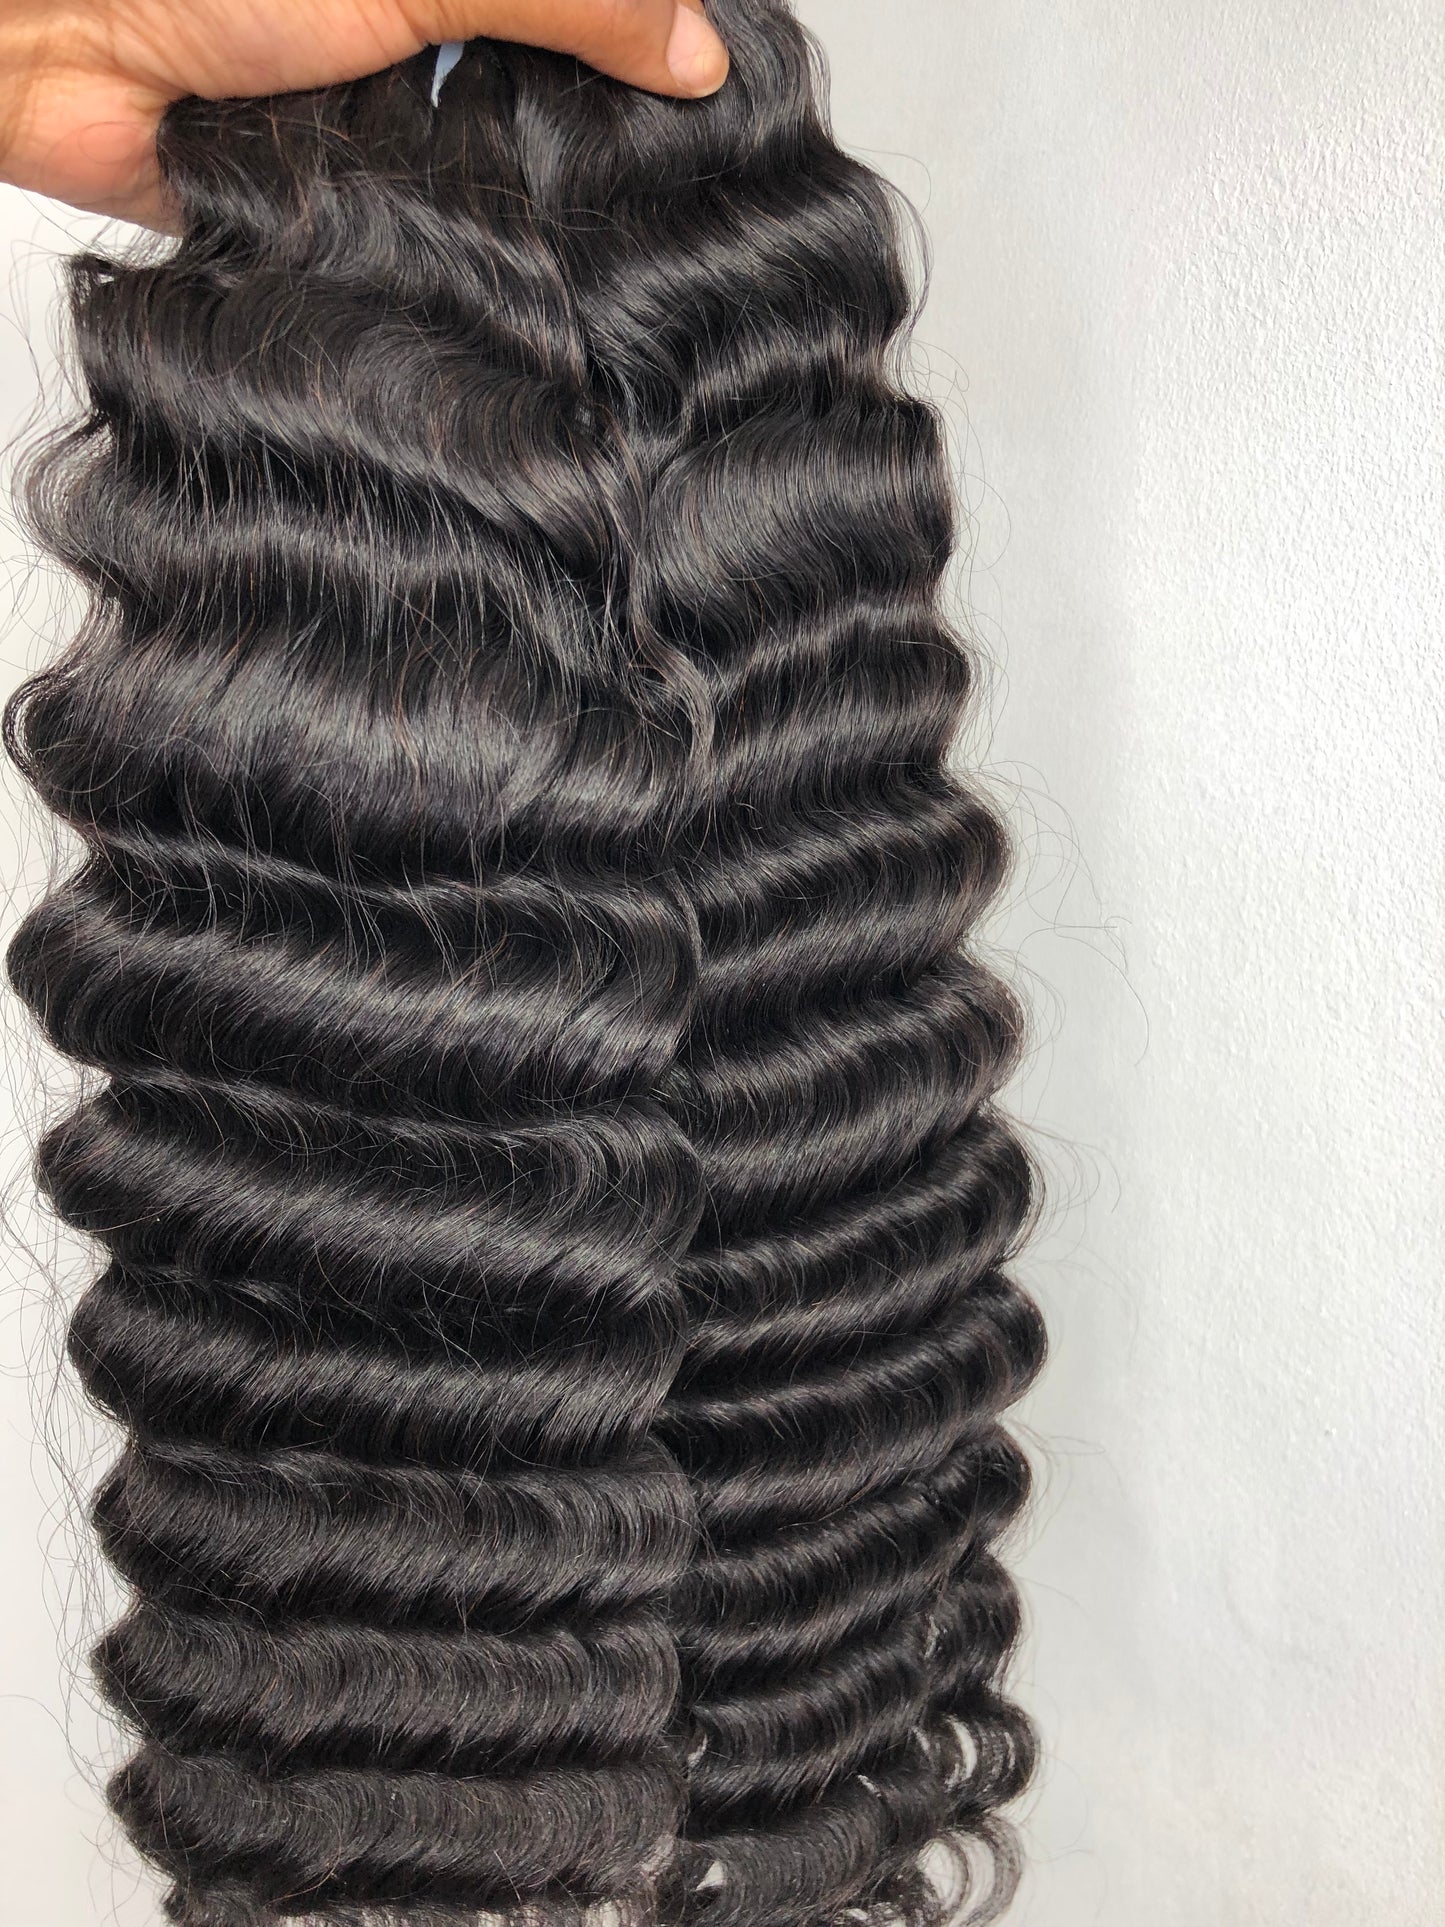 Water Wave Curly Hair Extensions human hair bundle deals